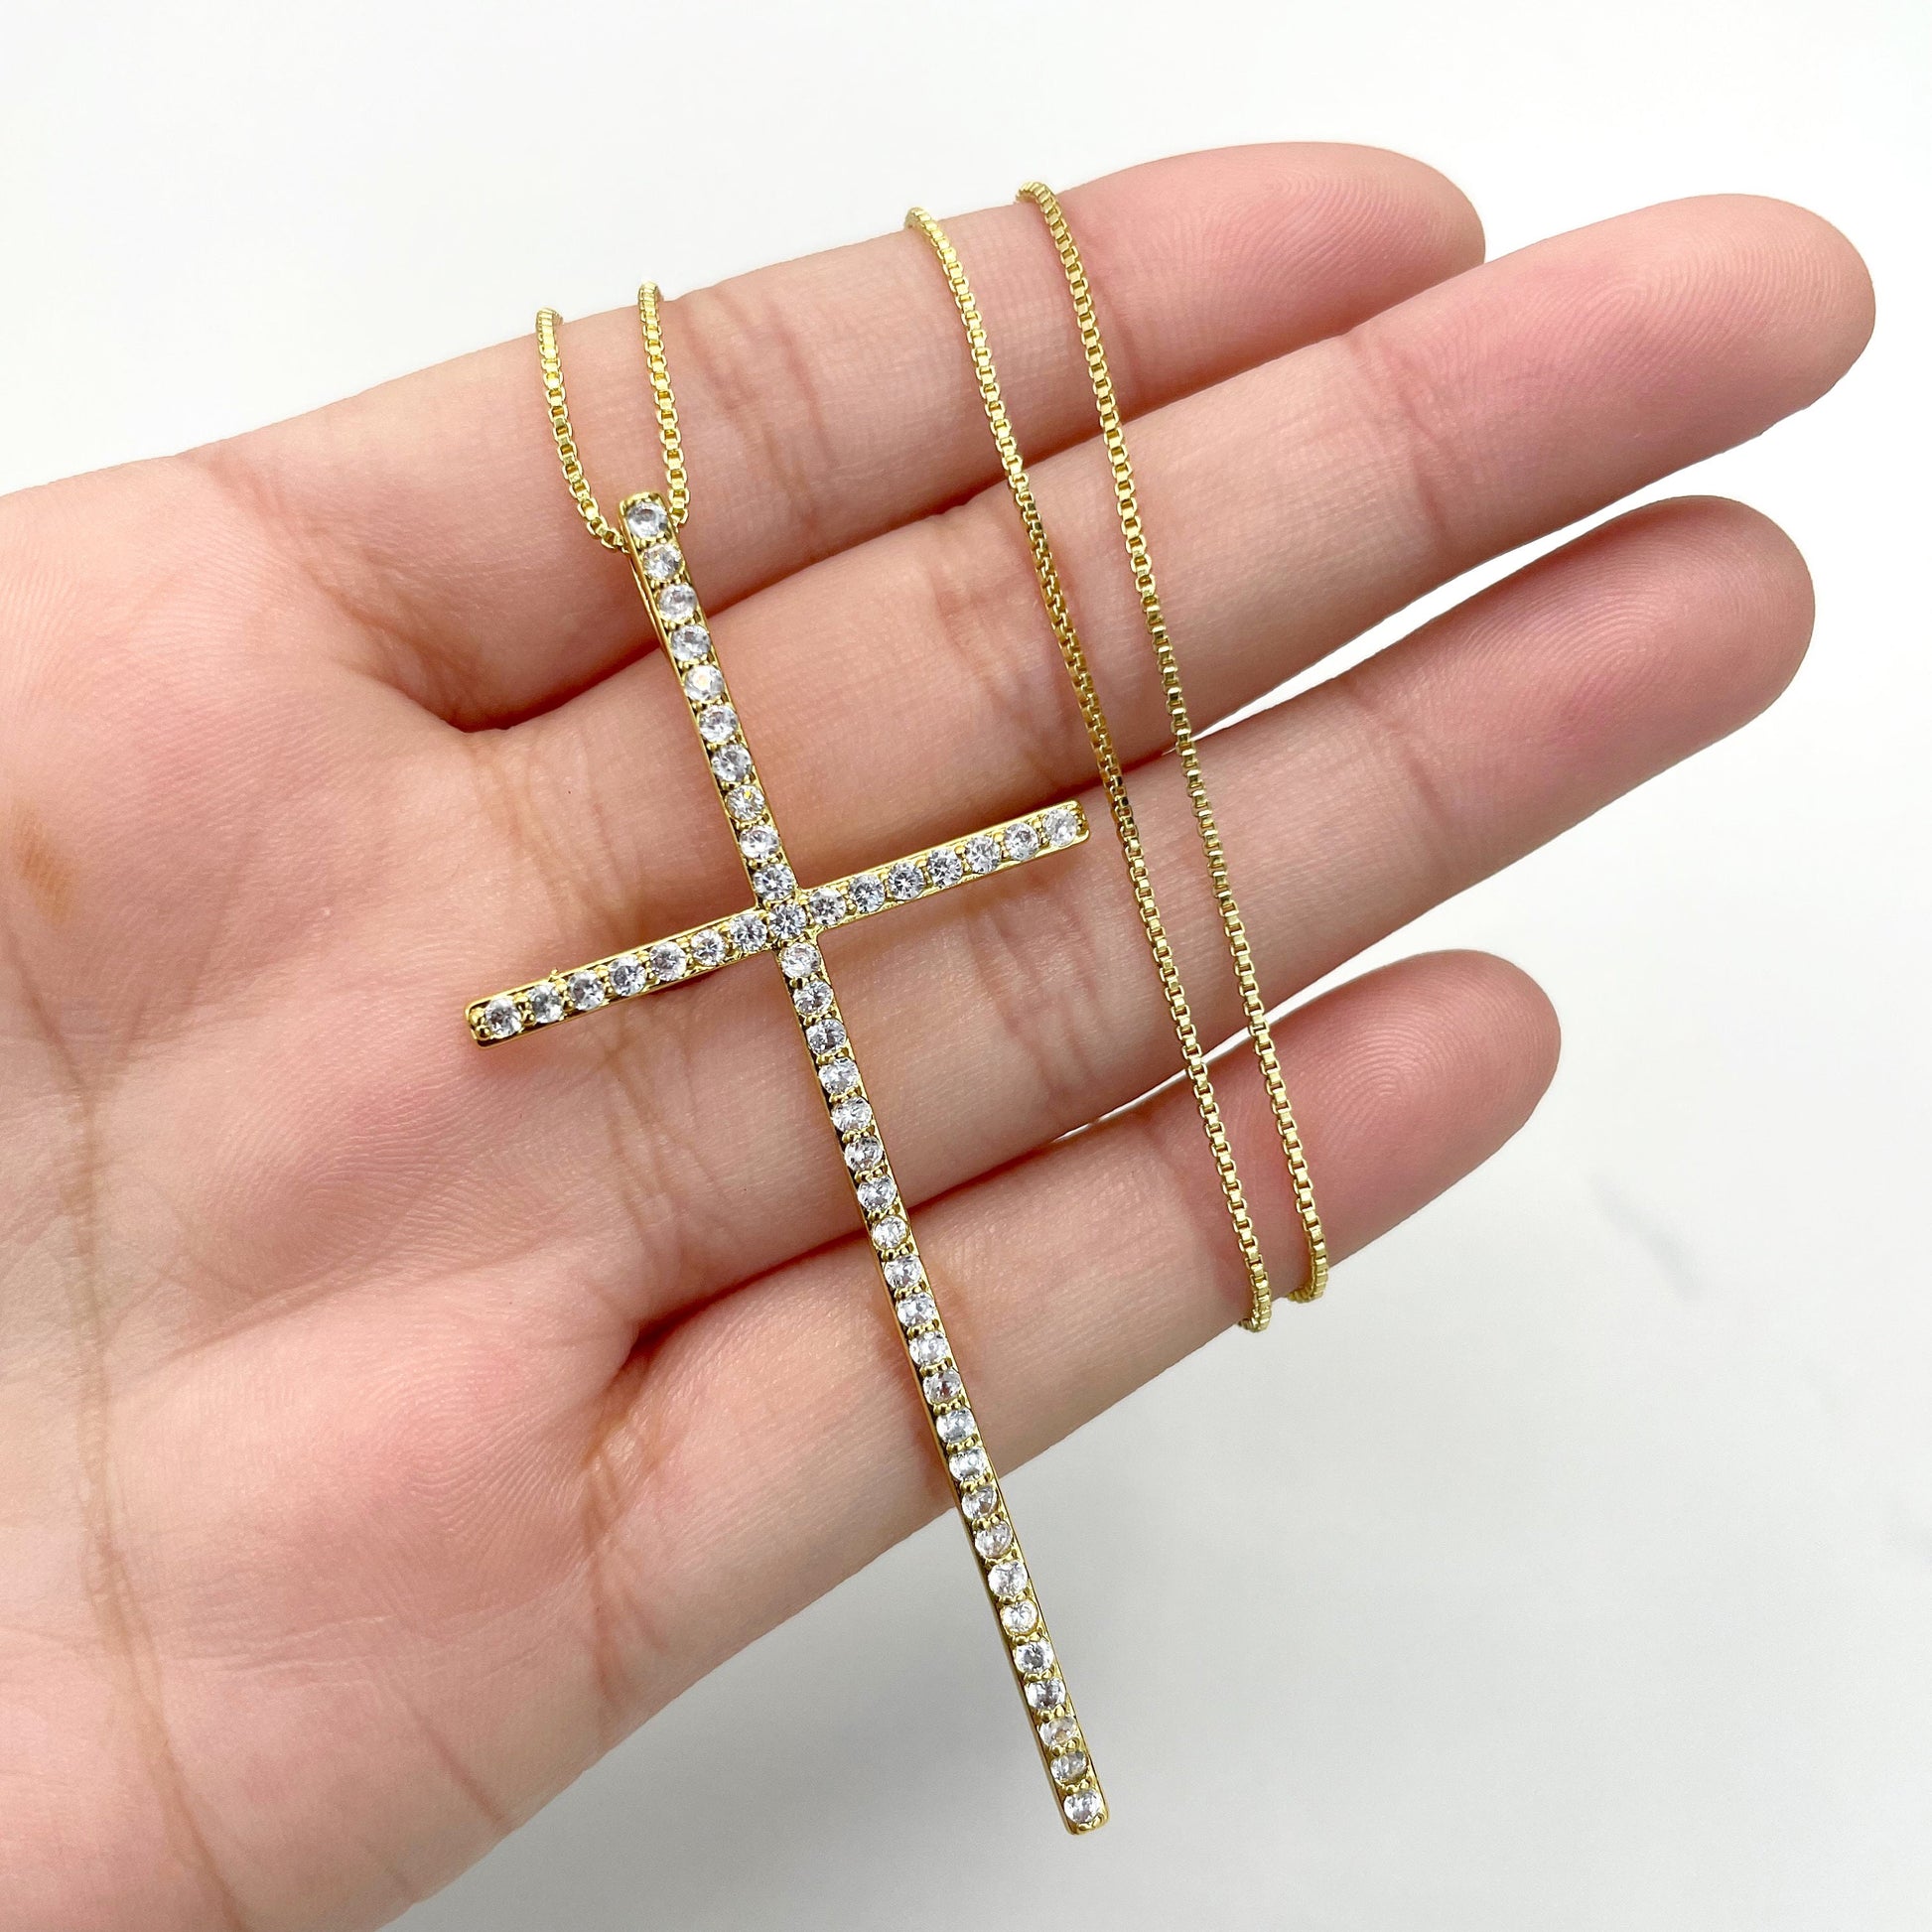 18k Gold Filled or Silver Filled 1mm Box Chain Necklace with Clear Cubic Zirconia Sparkling Cross Pendant, Wholesale Jewelry Making Supplies